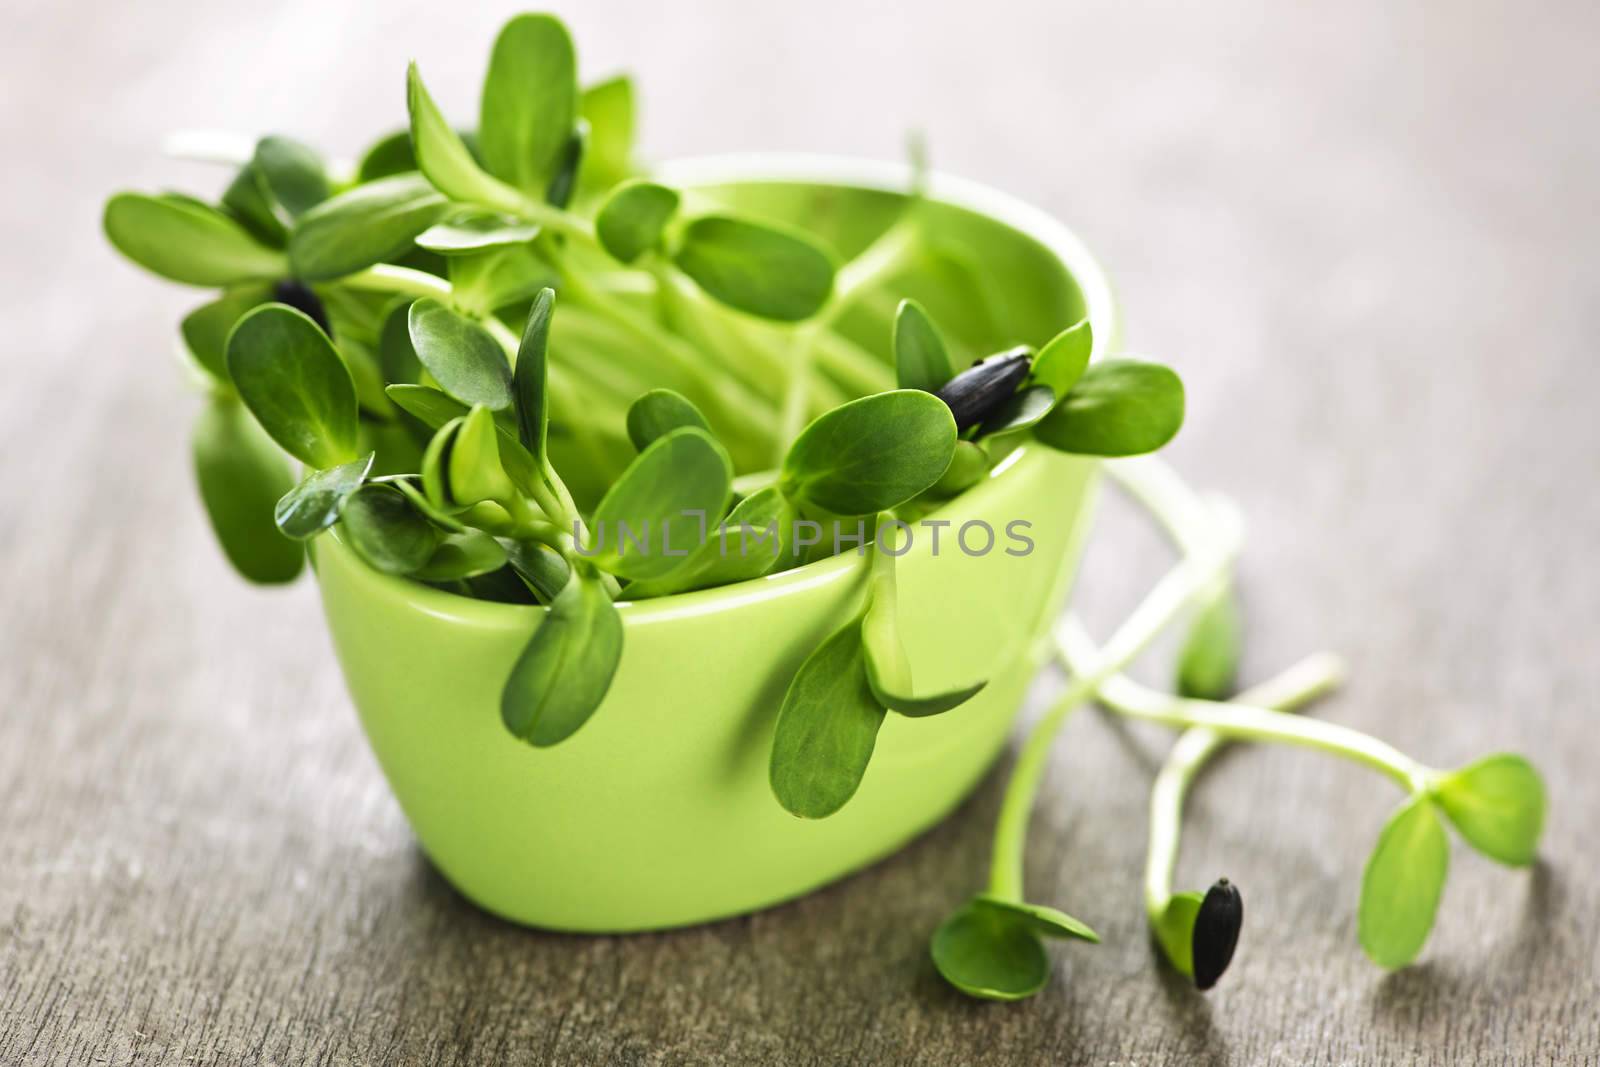 Organic green young sunflower sprouts in a cup